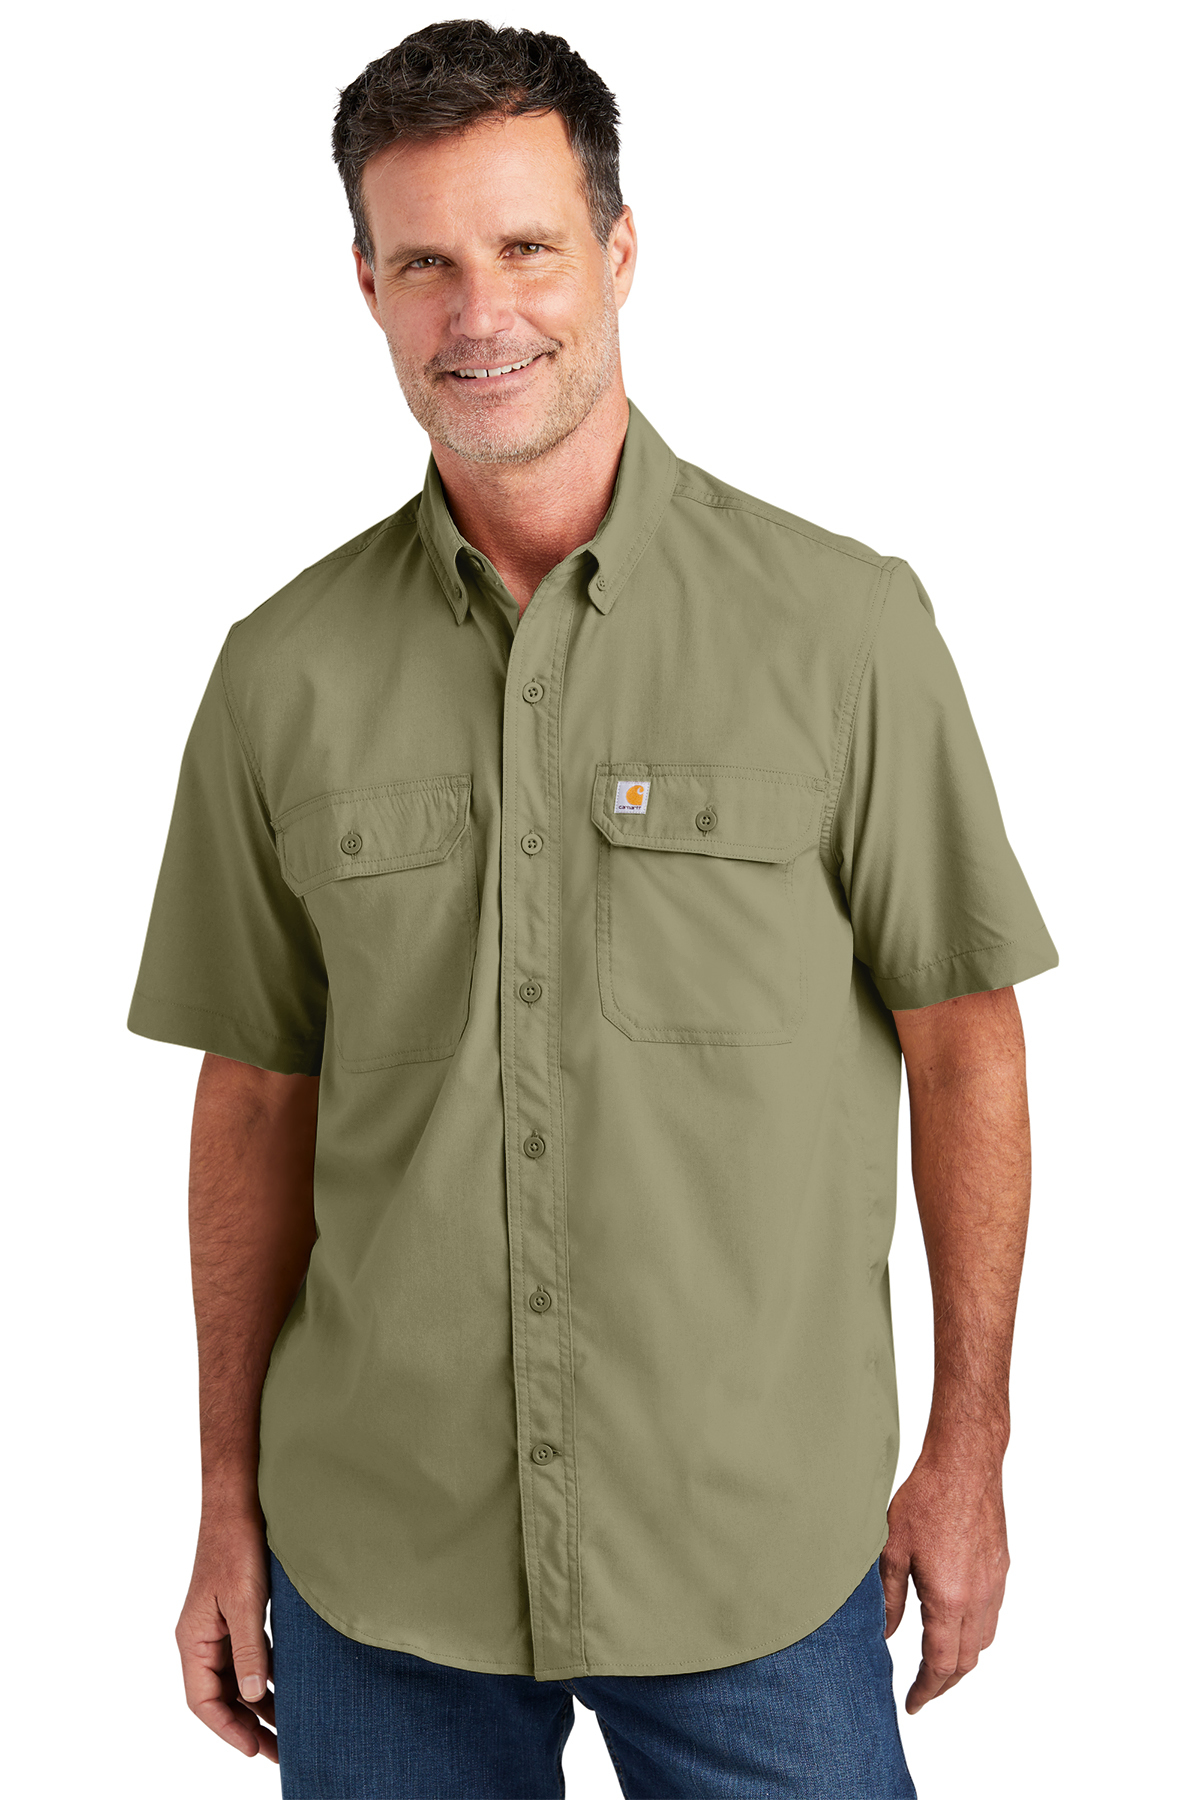 Carhartt Force Solid Short Sleeve Shirt, Product